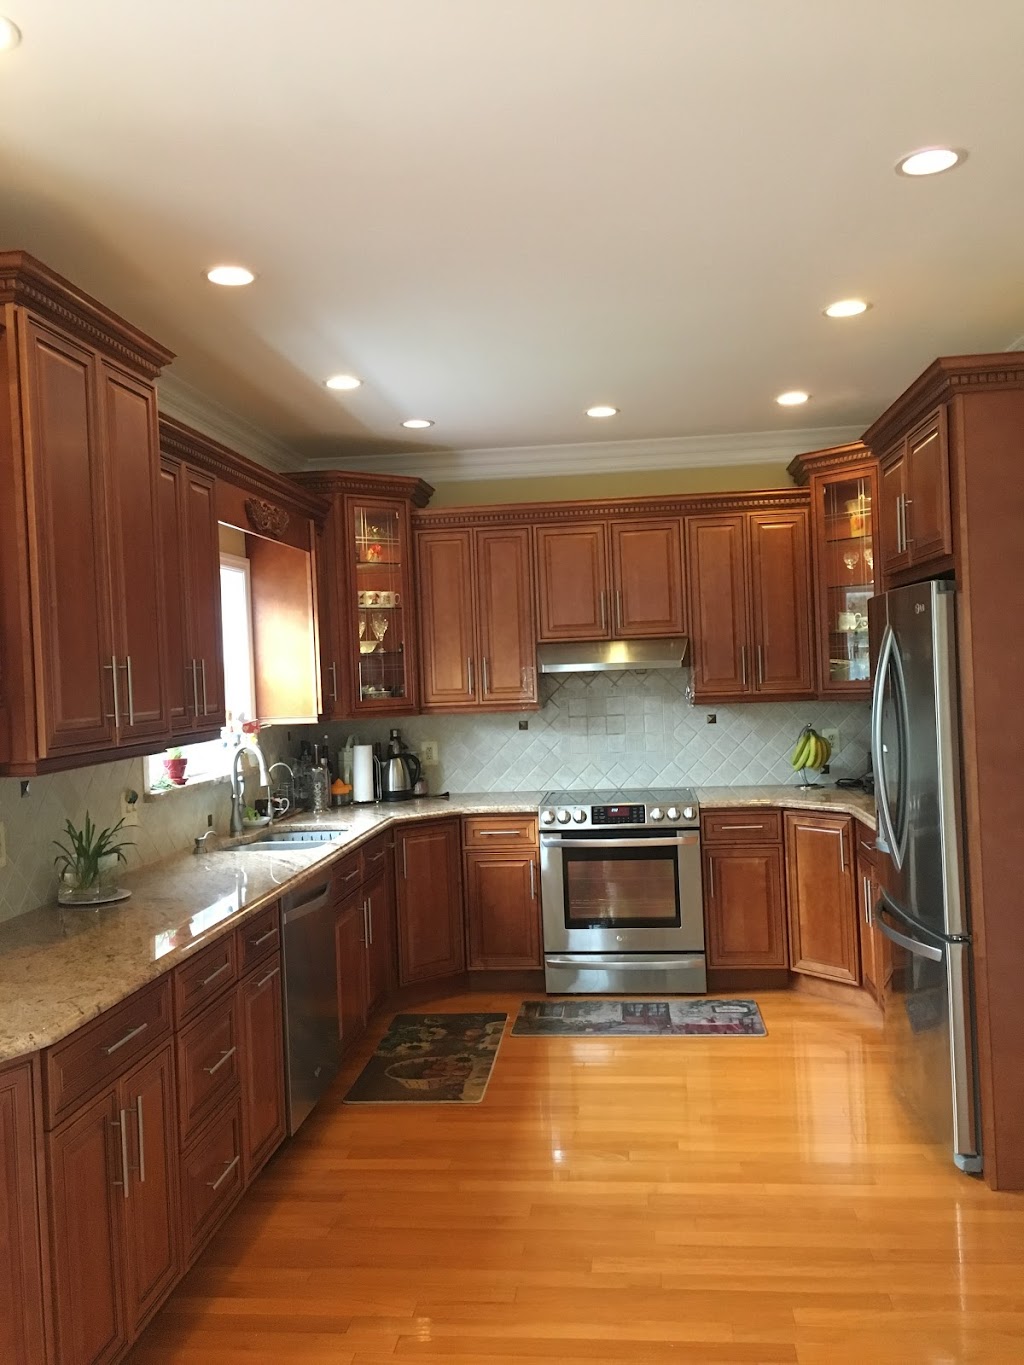 Best Stone and Kitchen / BSK Kitchen and Bath | 514 Georges Rd 2 Floor, North Brunswick Township, NJ 08902 | Phone: (732) 418-3688